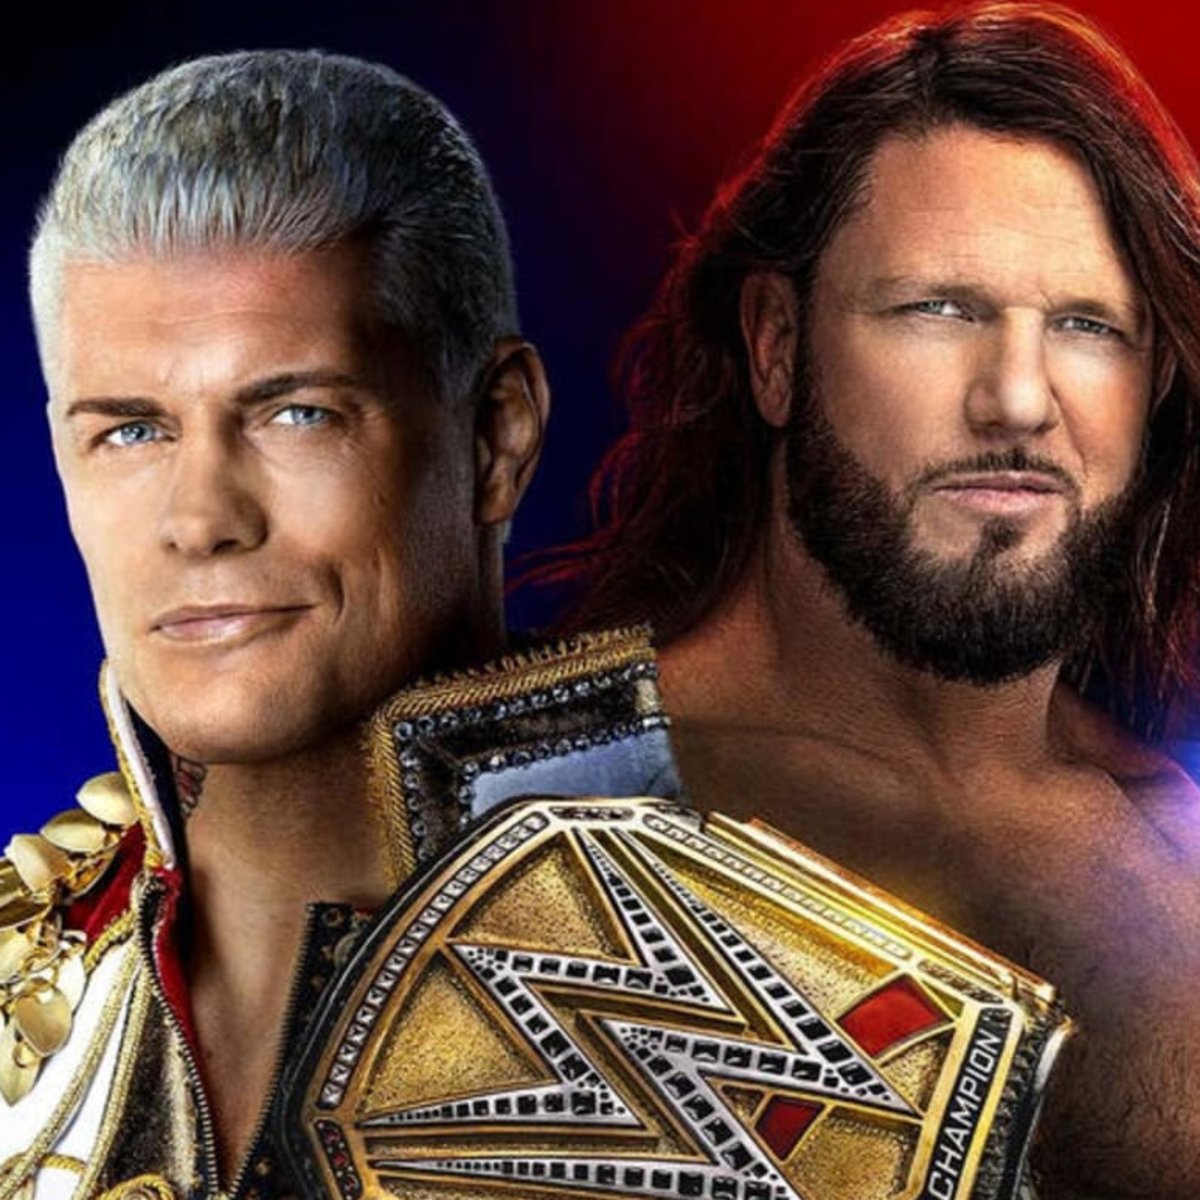 While Cody vs AJ at Backlash deserves the five stars it got, one has to admit that great part of that rating is owed to the atmosphere the crowd was able to create.

That's not taking anything away from the competitors, but recognizing the role the crowd plays in wrestling.